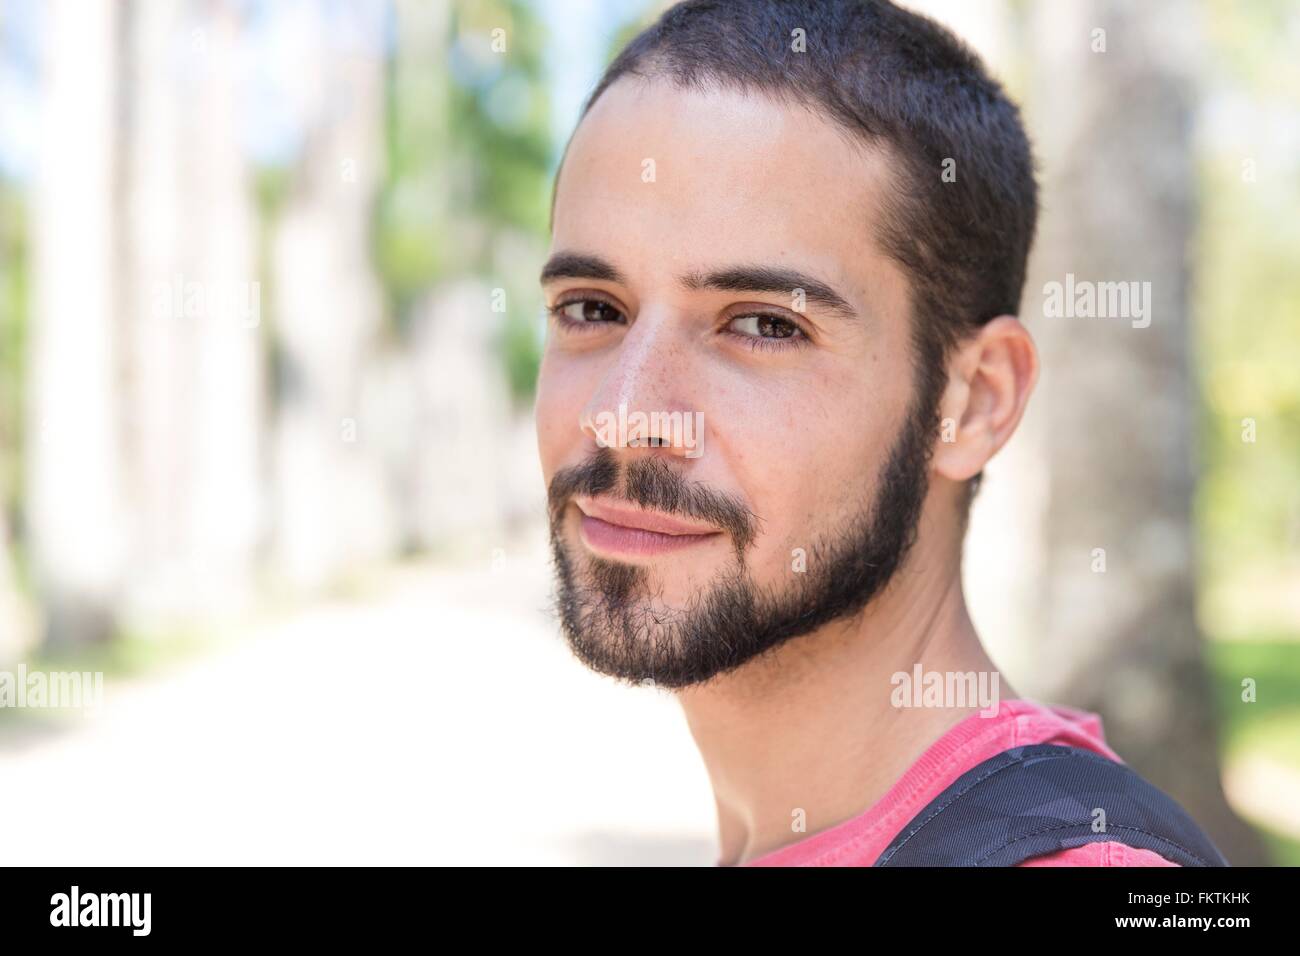 Portrait   young man, smiling Stock Photo